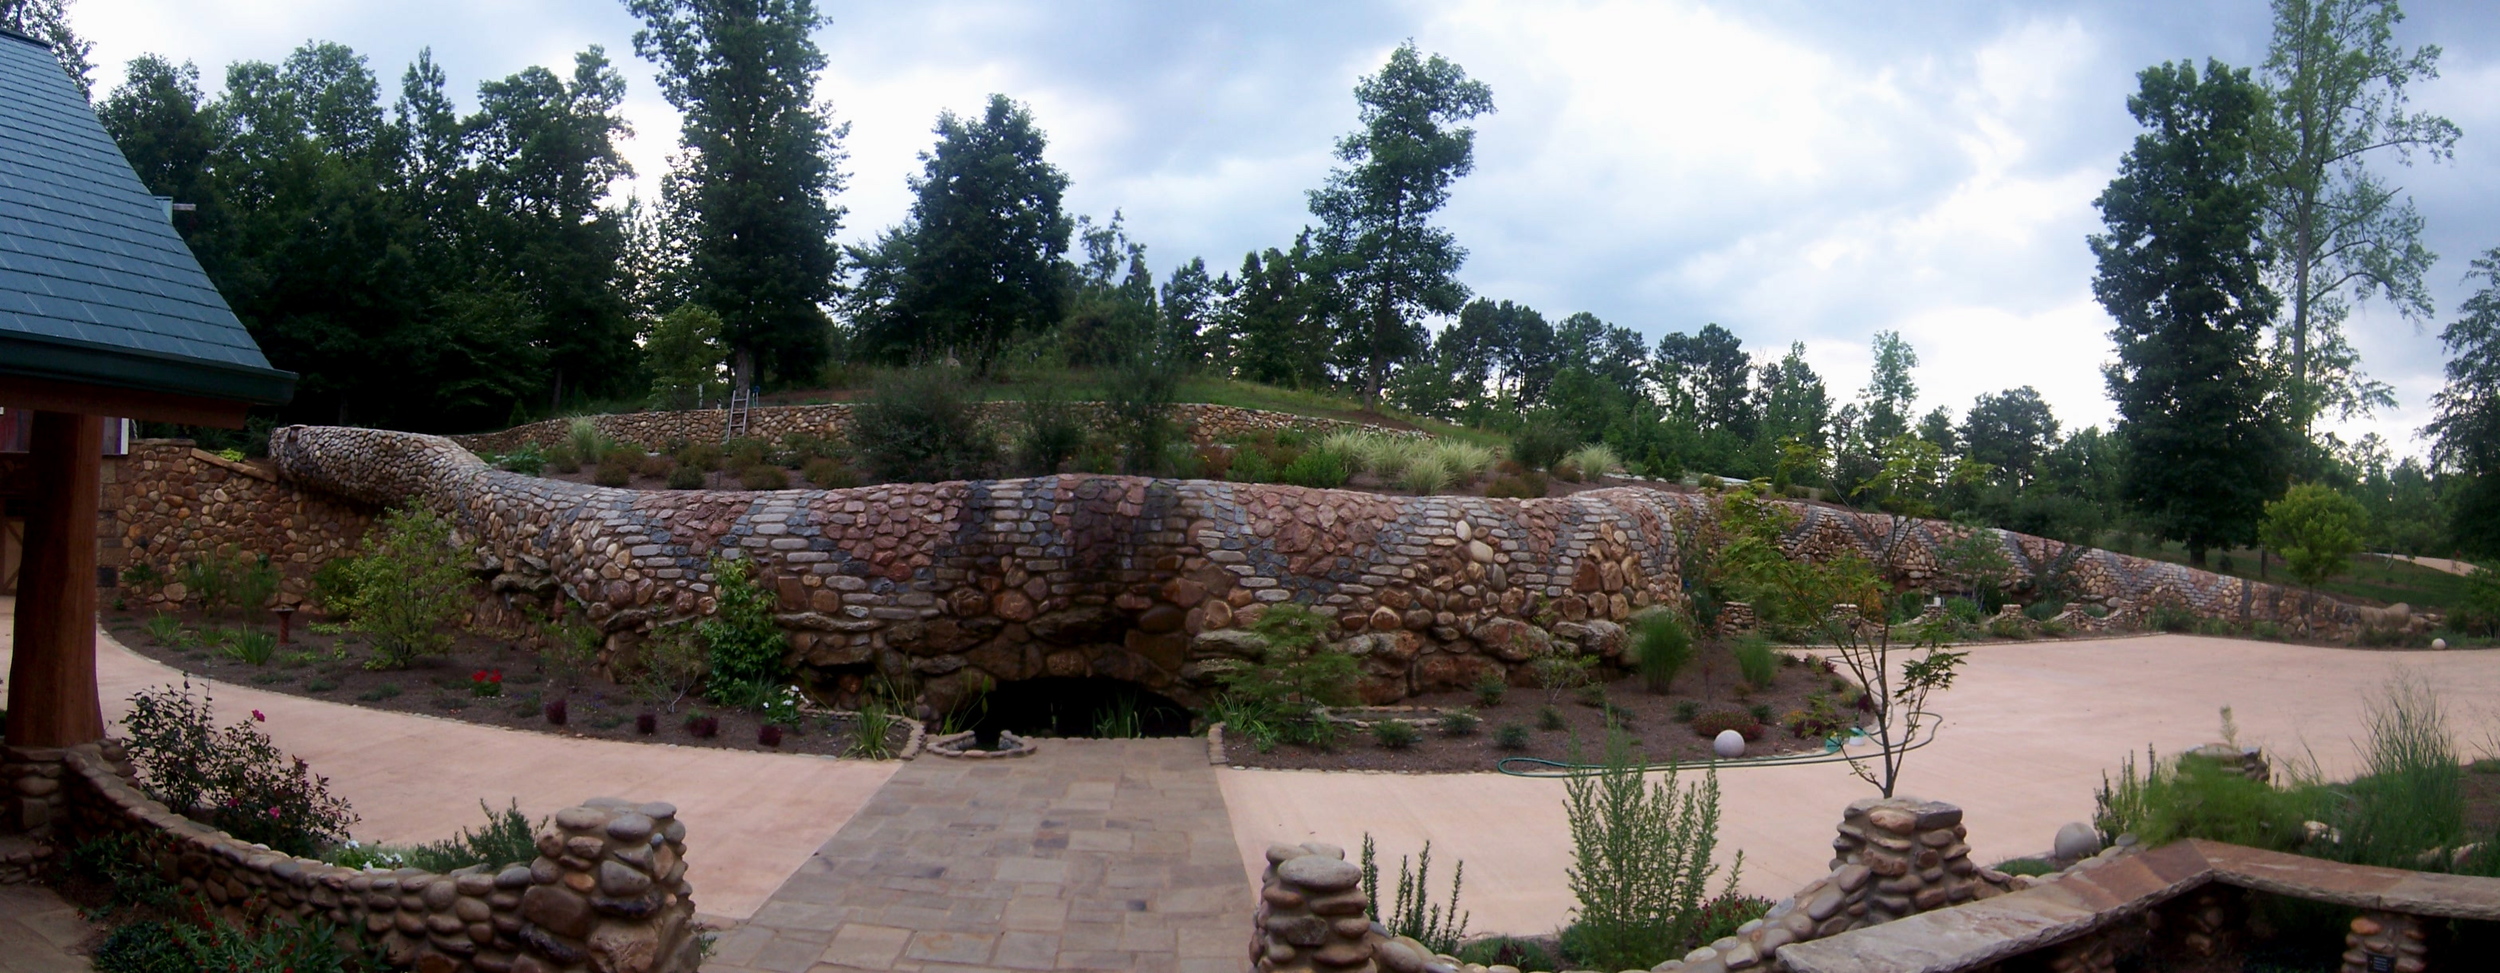 Serpentine retaining wall from courtyard.